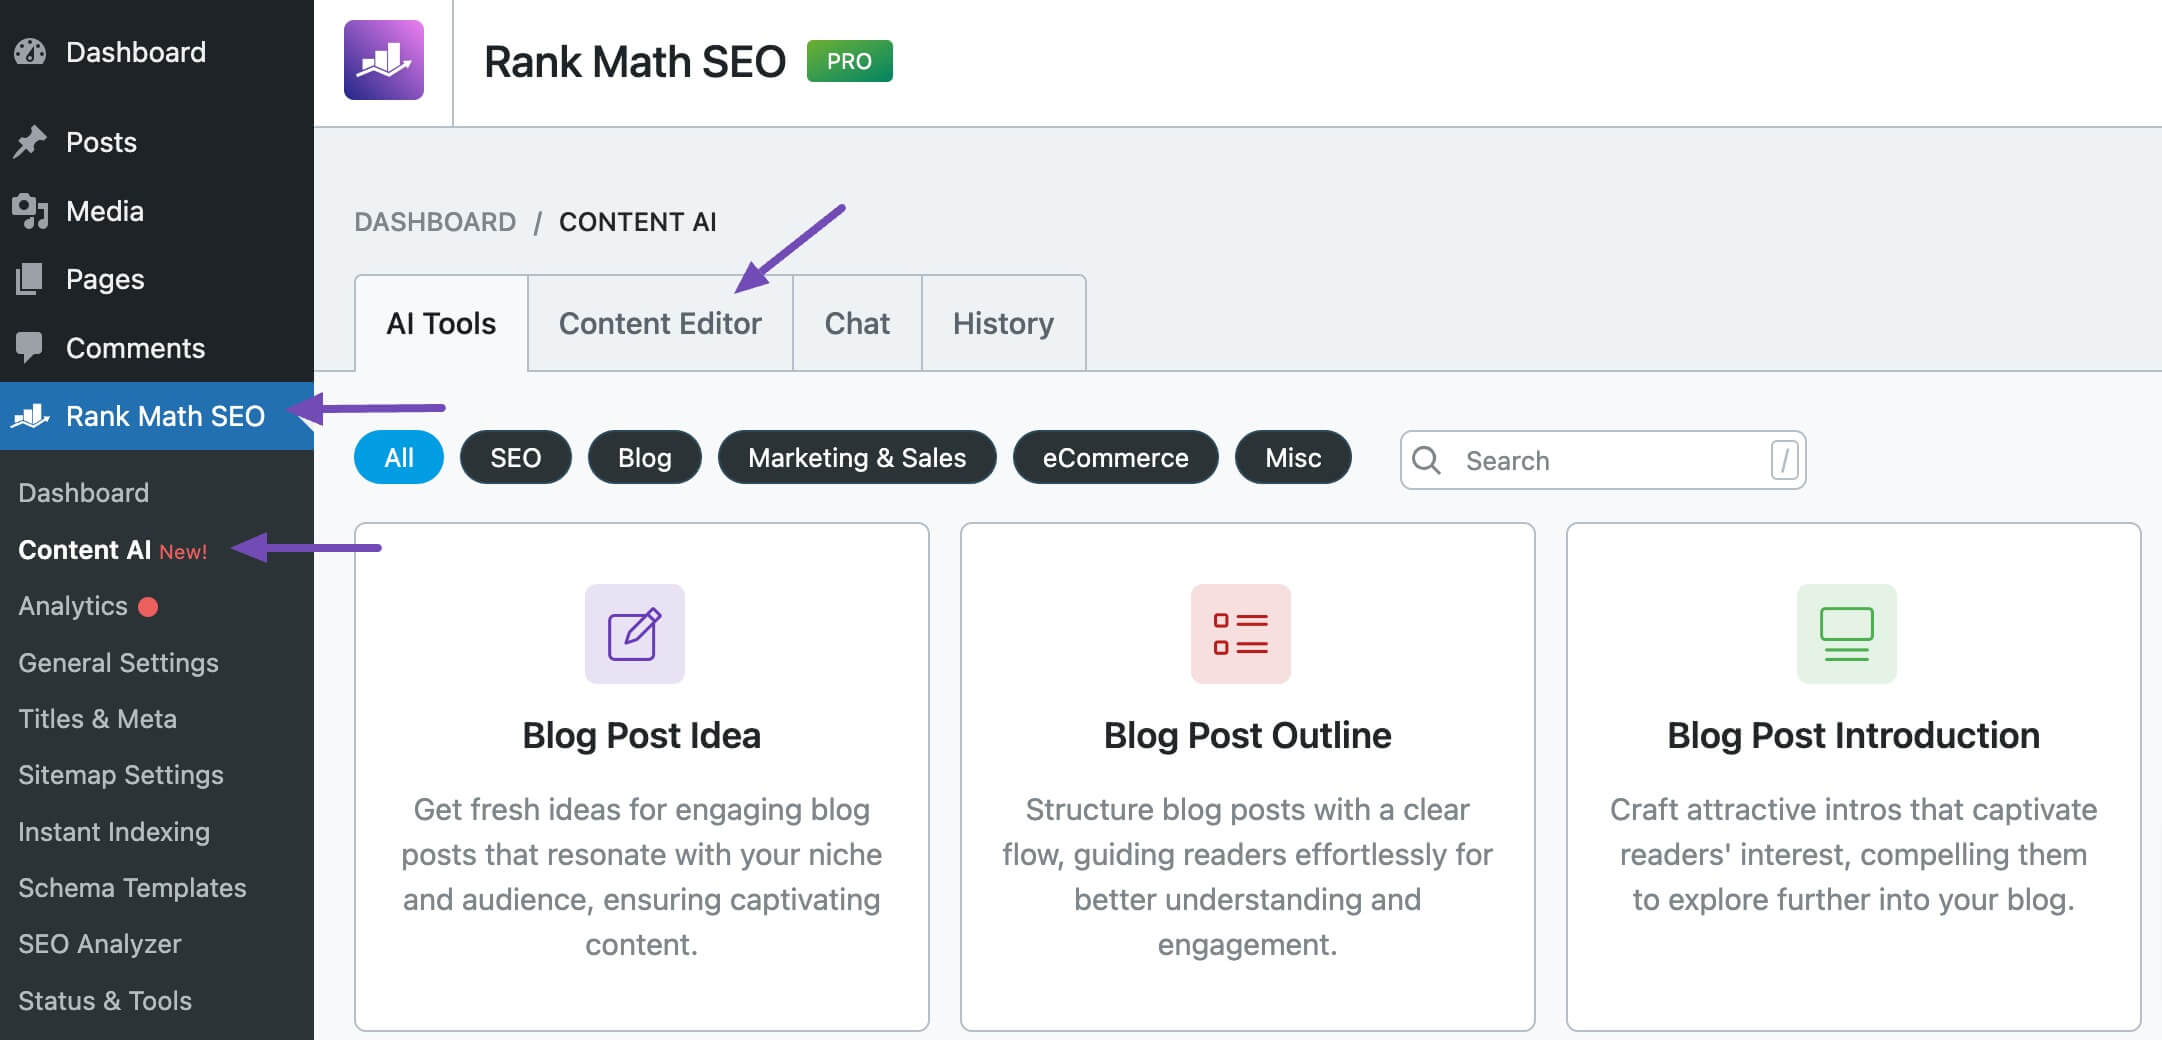 Navigate to the Content Editor